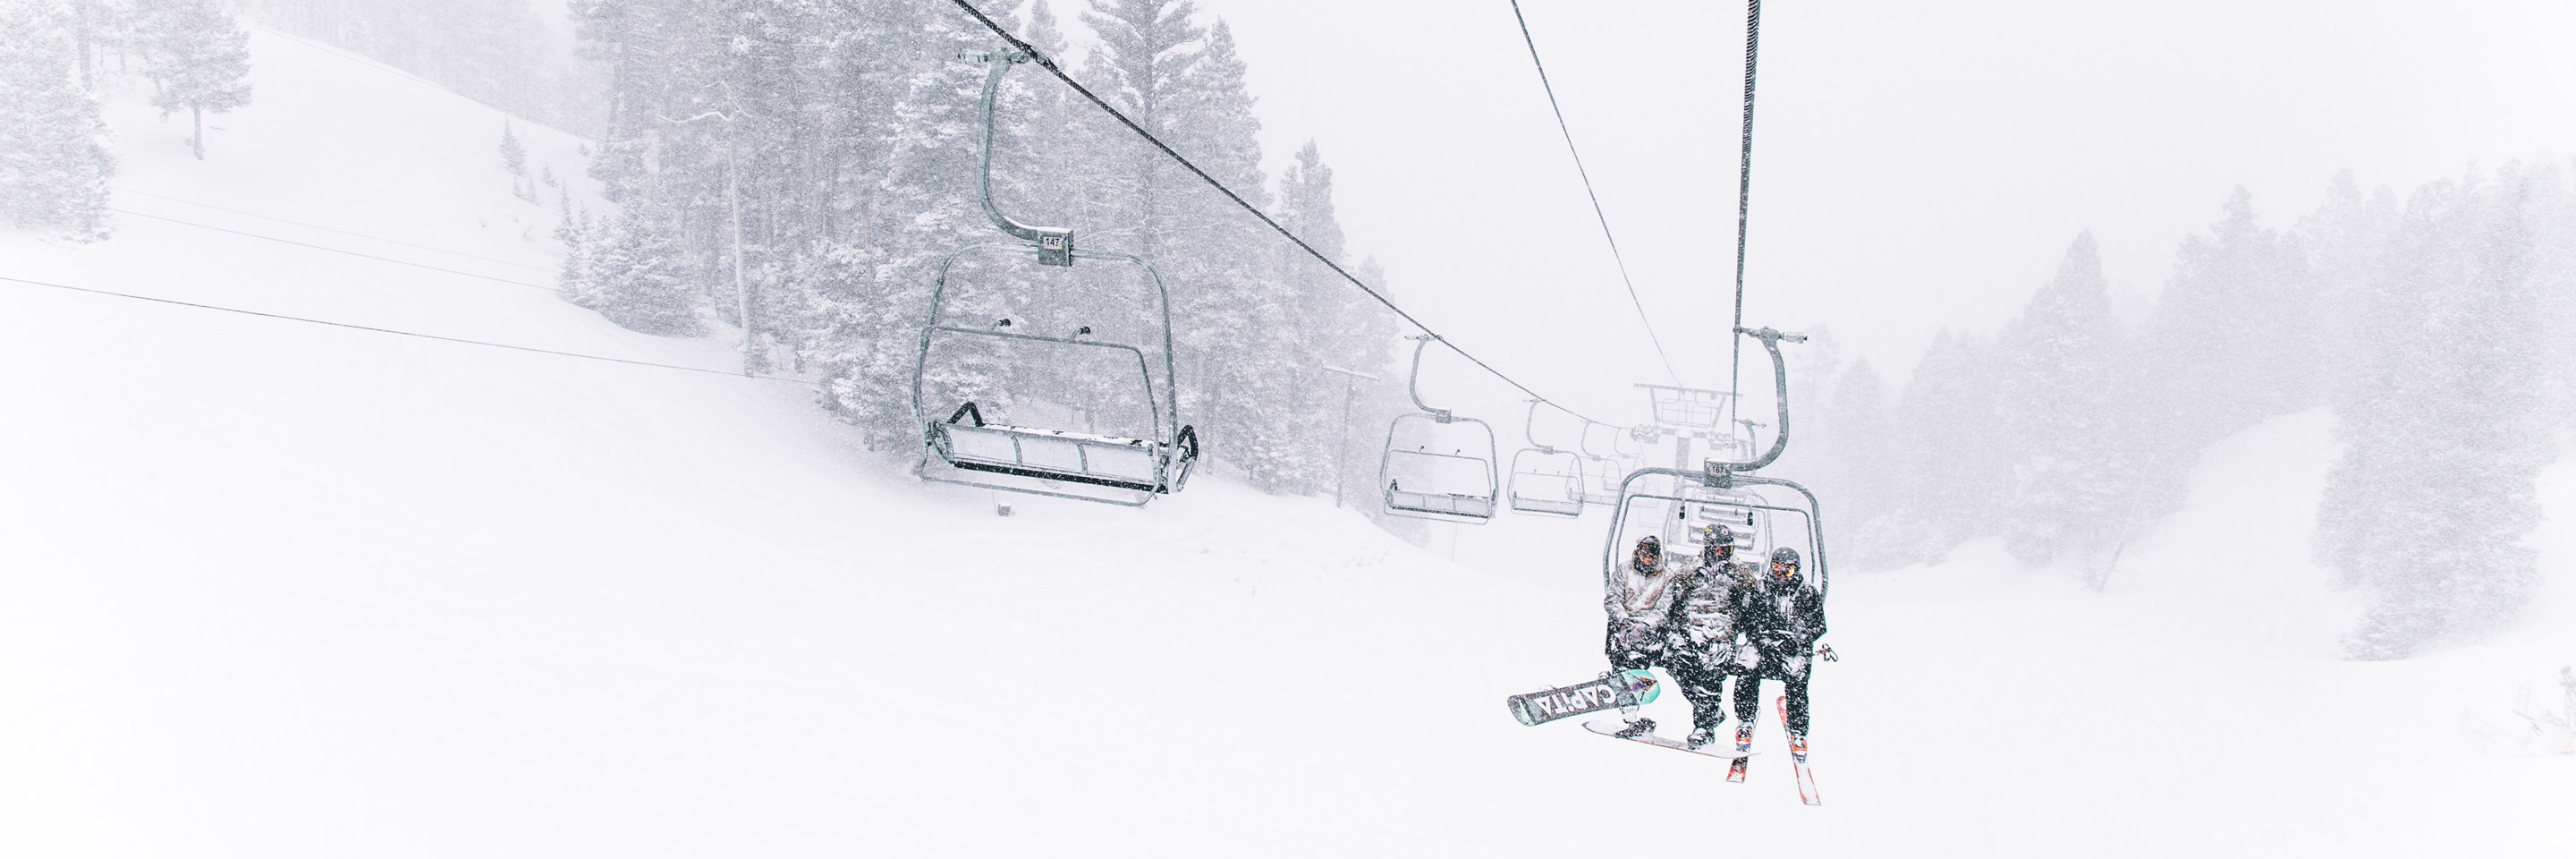 three skiers and snowboarders riding a chairlift in snow